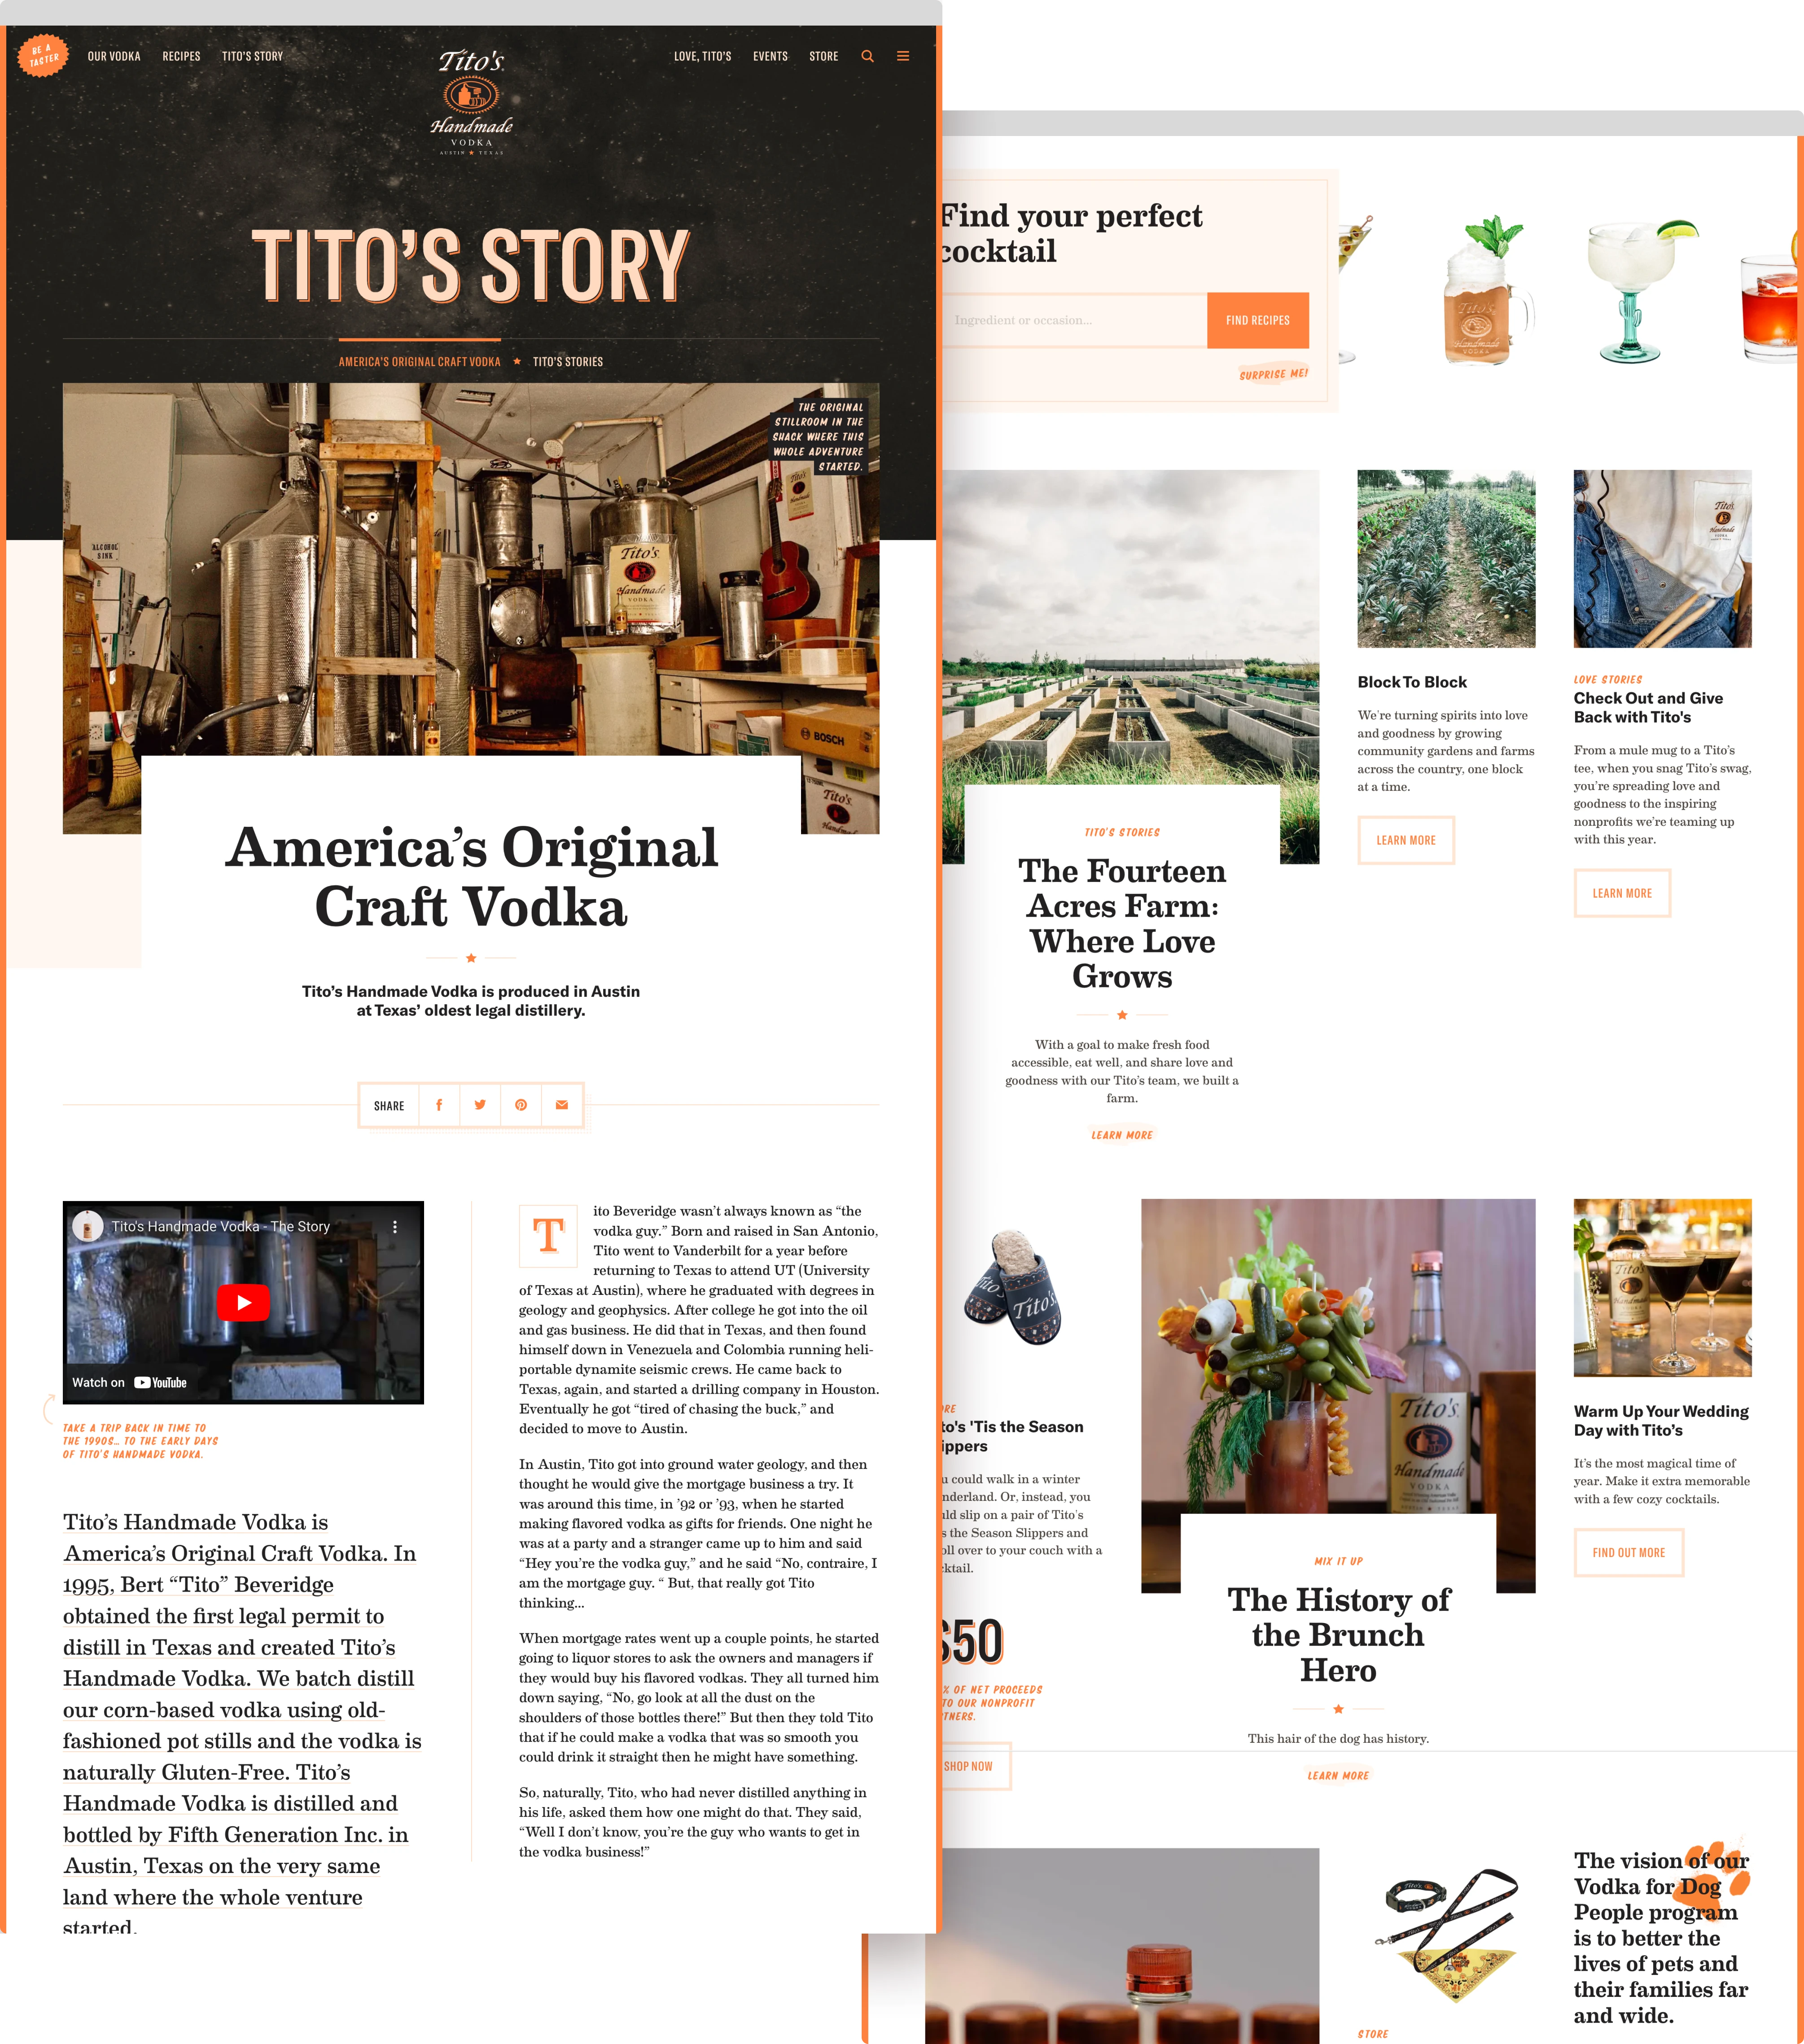 The Tito’s story and cocktail finder pages